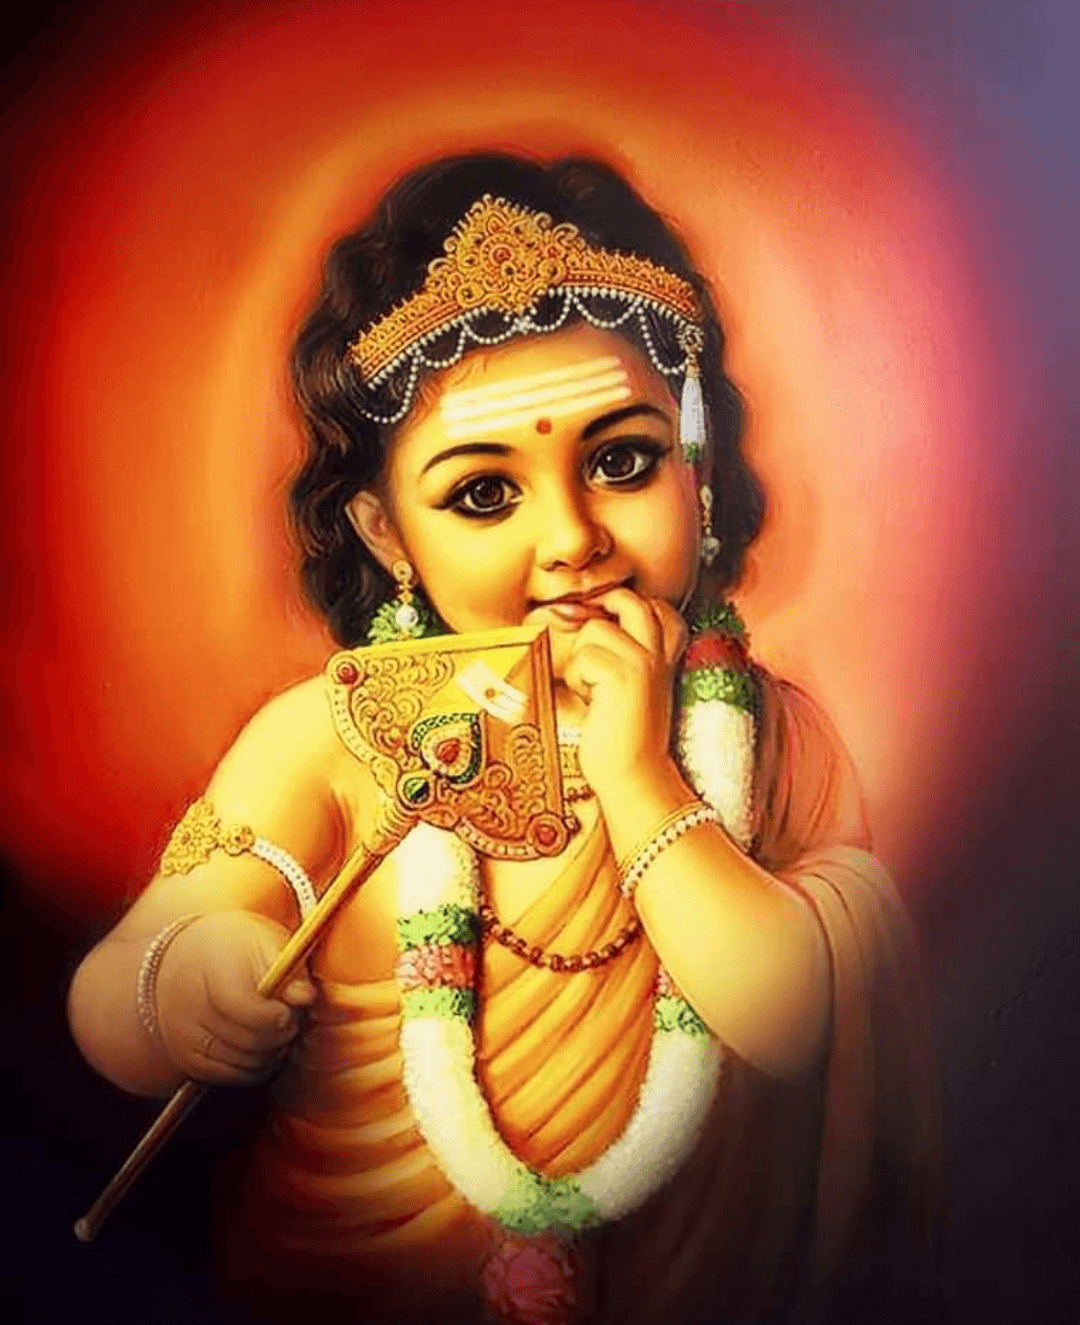 A Young Lord Krishna In A Golden Dress